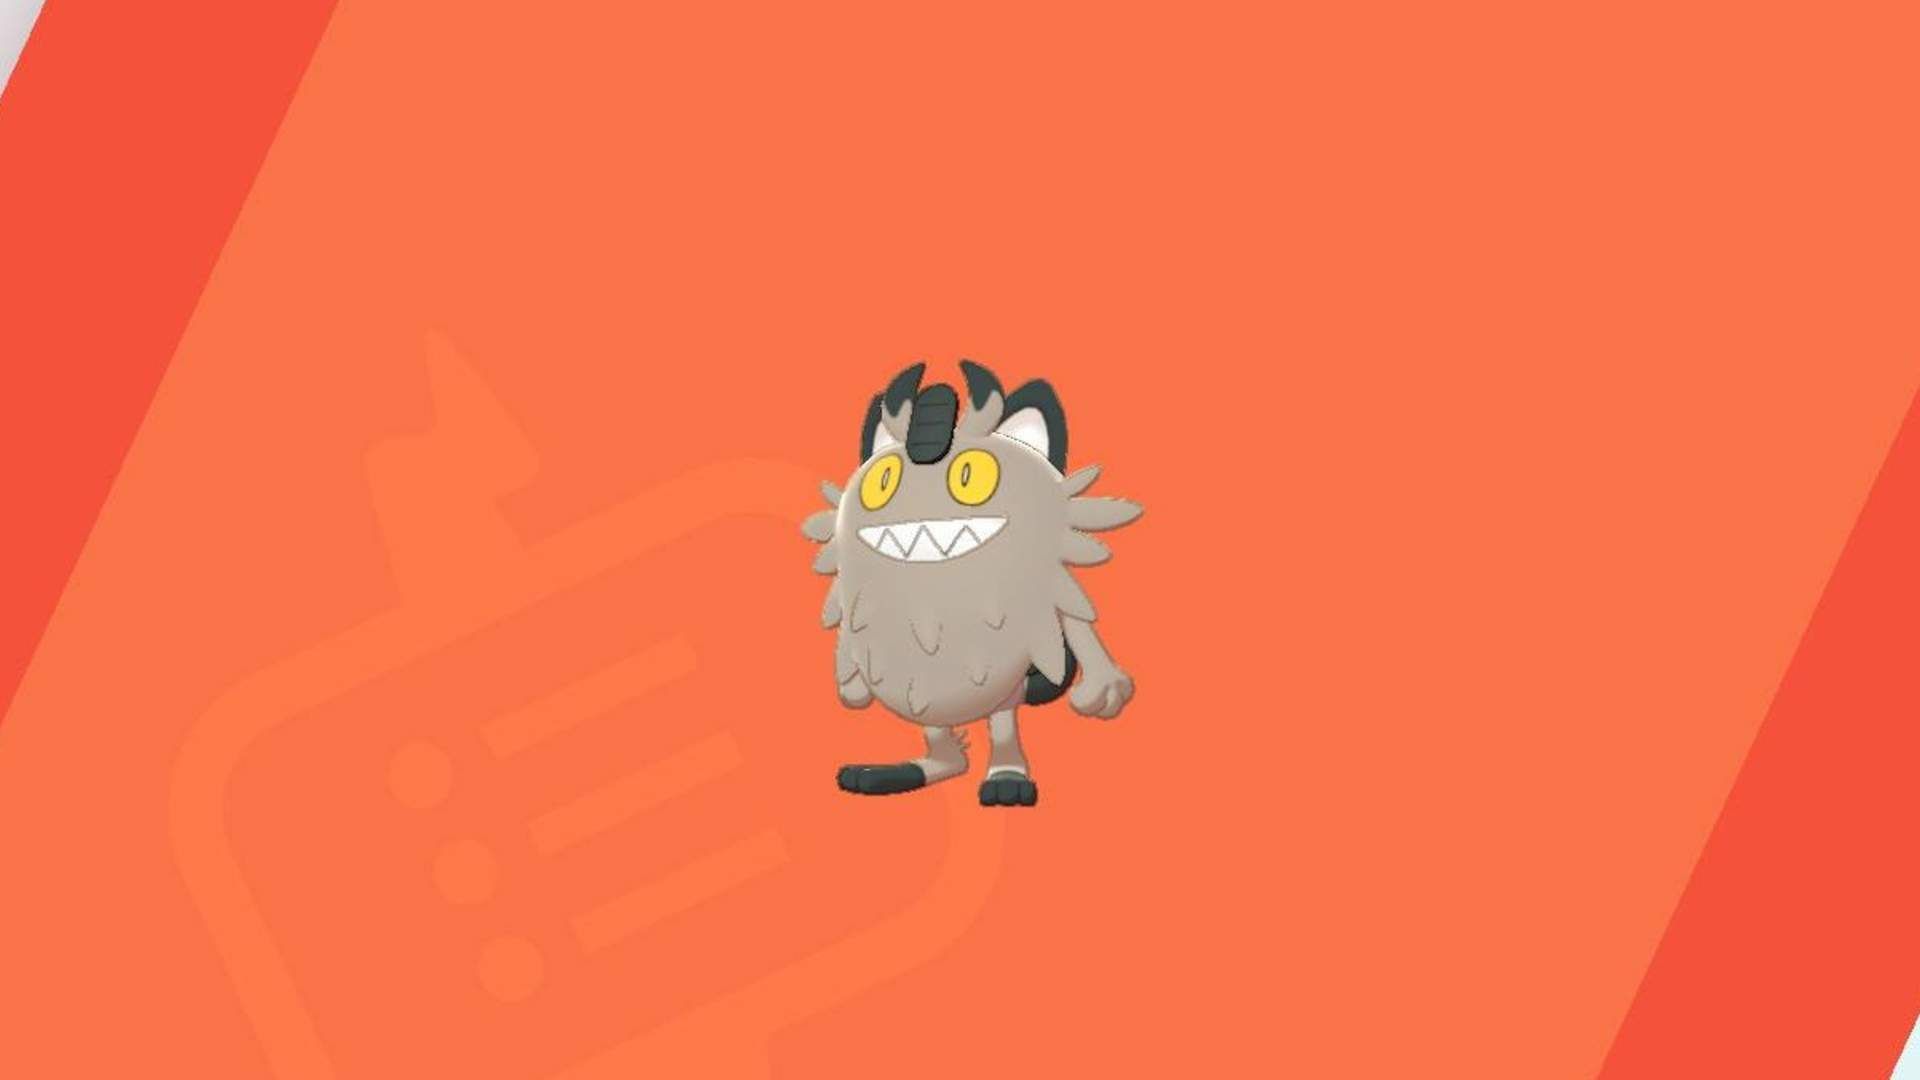 Galarian Meowth: Oh My God, What the Hell